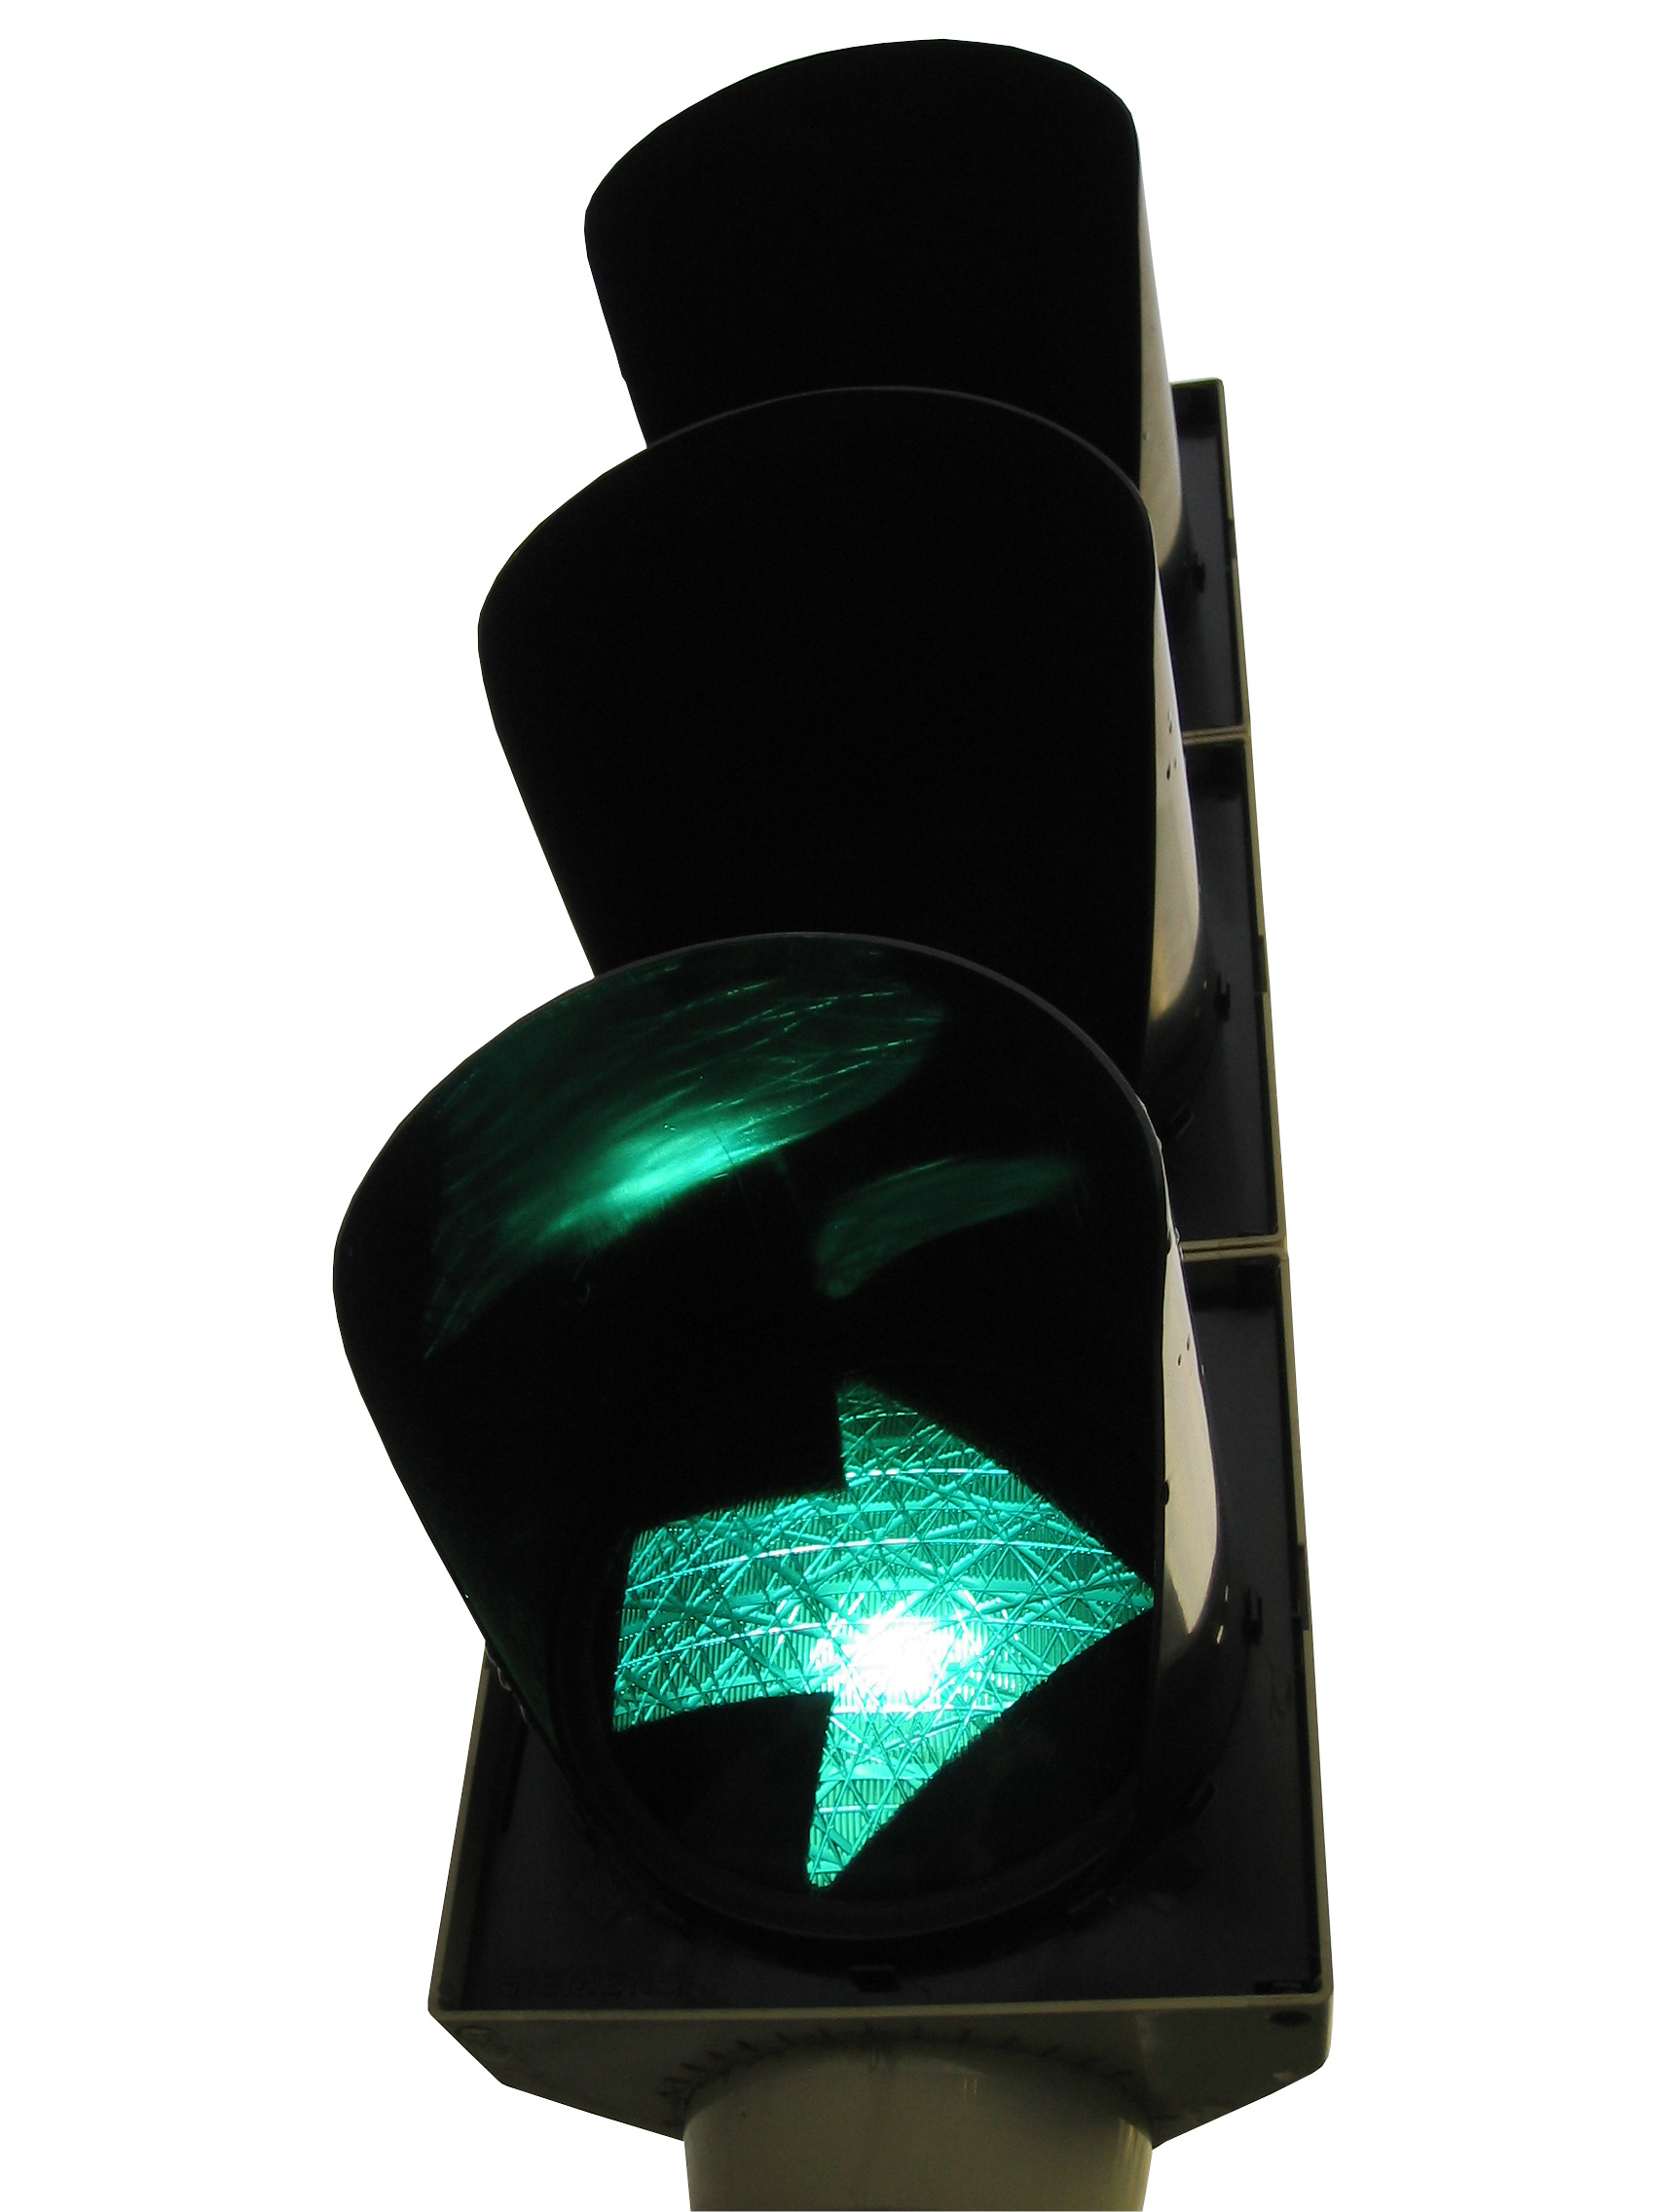 Picture Of Green Traffic Light - ClipArt Best